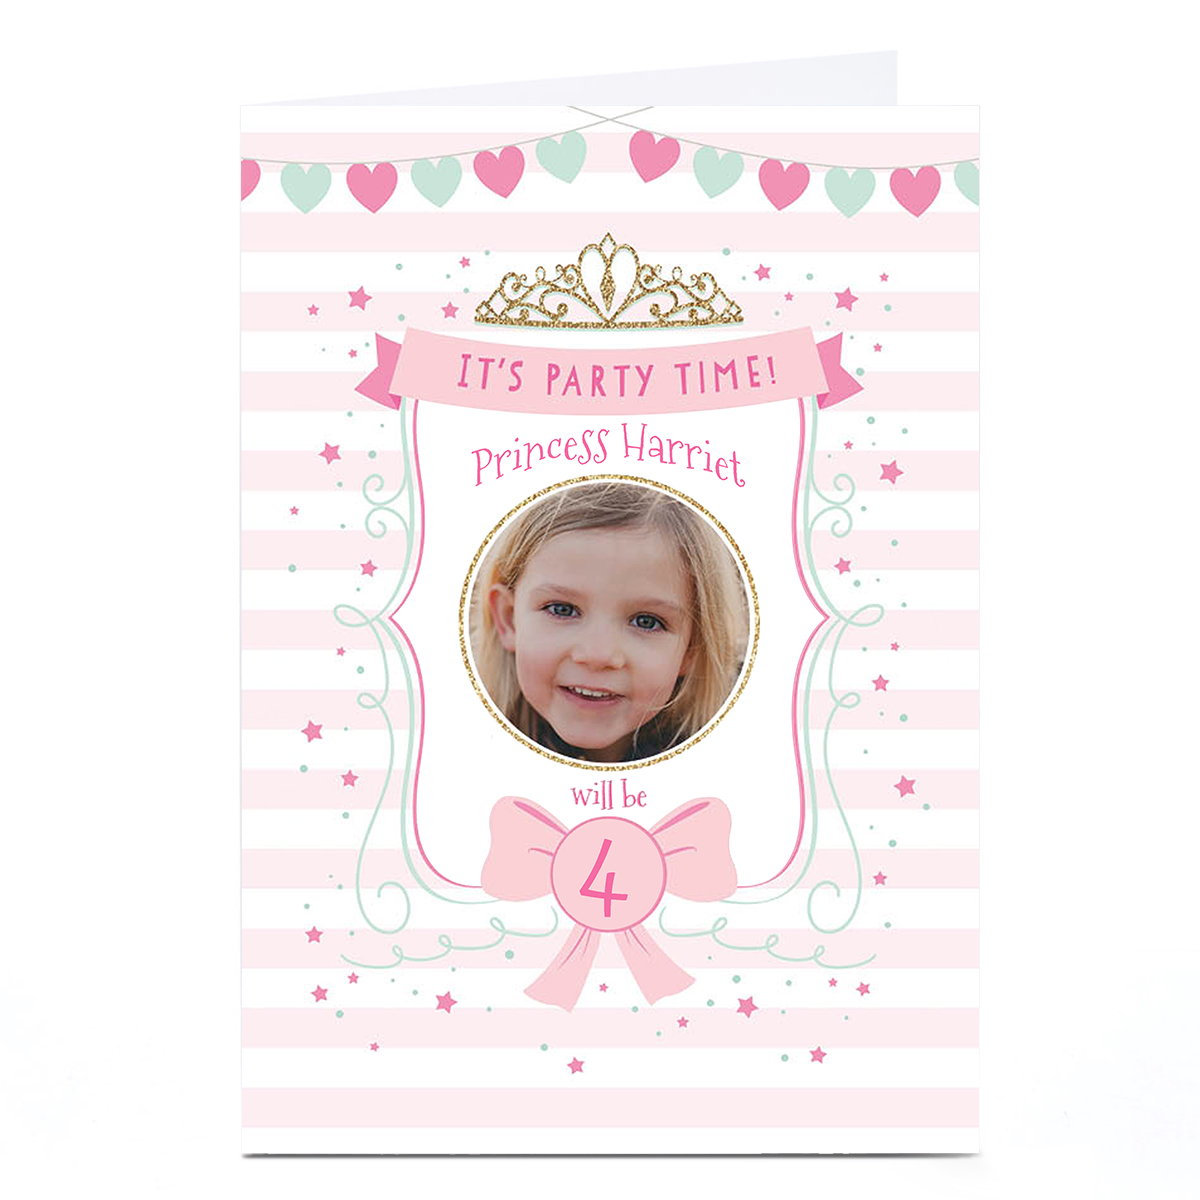 Personalised Birthday Party Invitation - It's Party Time!